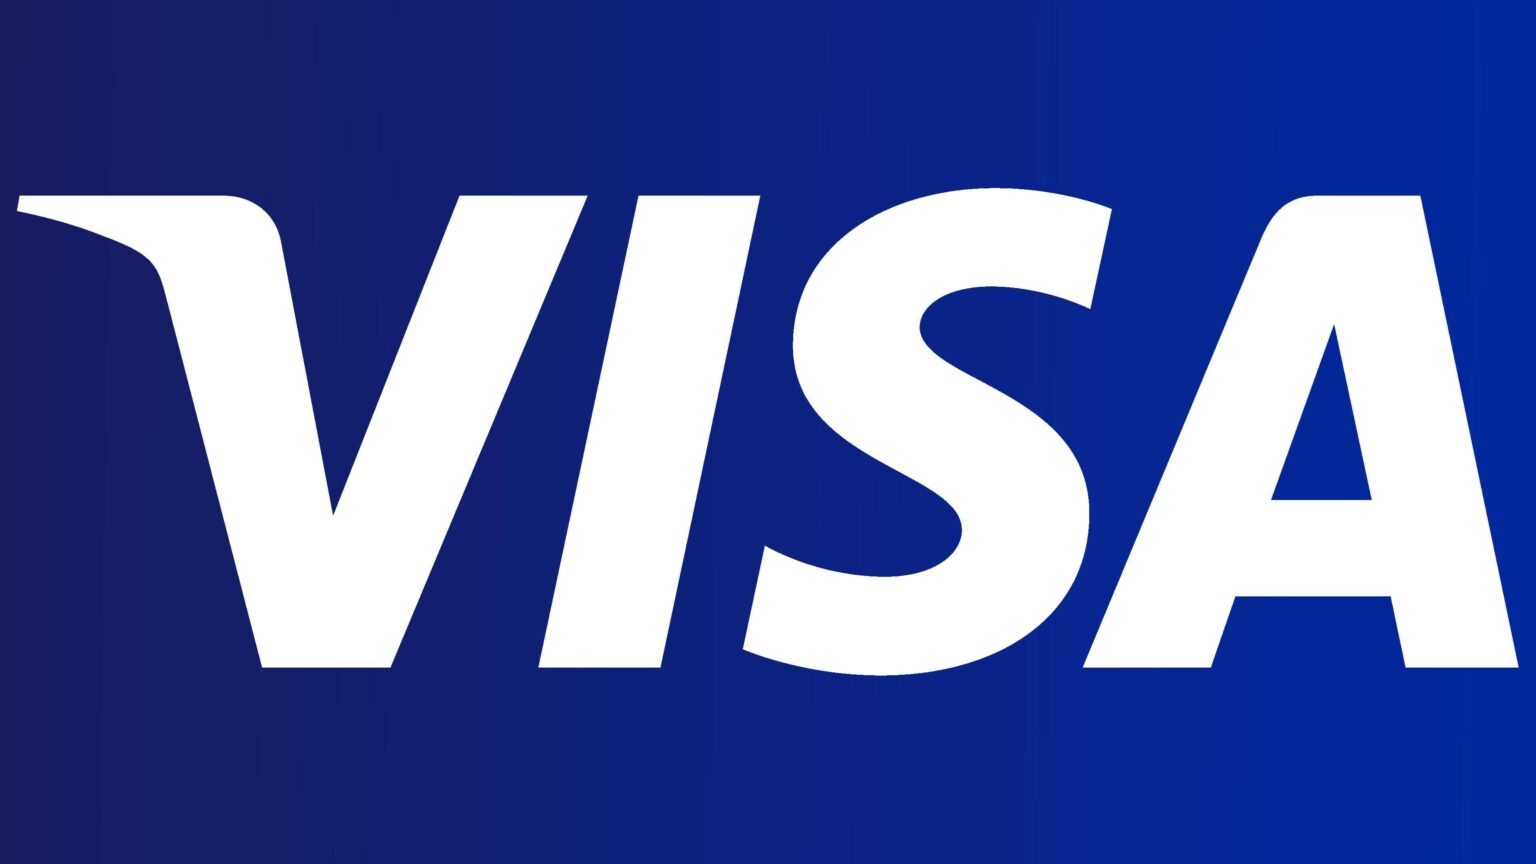 The Visa Ready Creator Commerce program will connect partners across the ecosystem to bring tools like faster payouts and tipping to creator platforms.